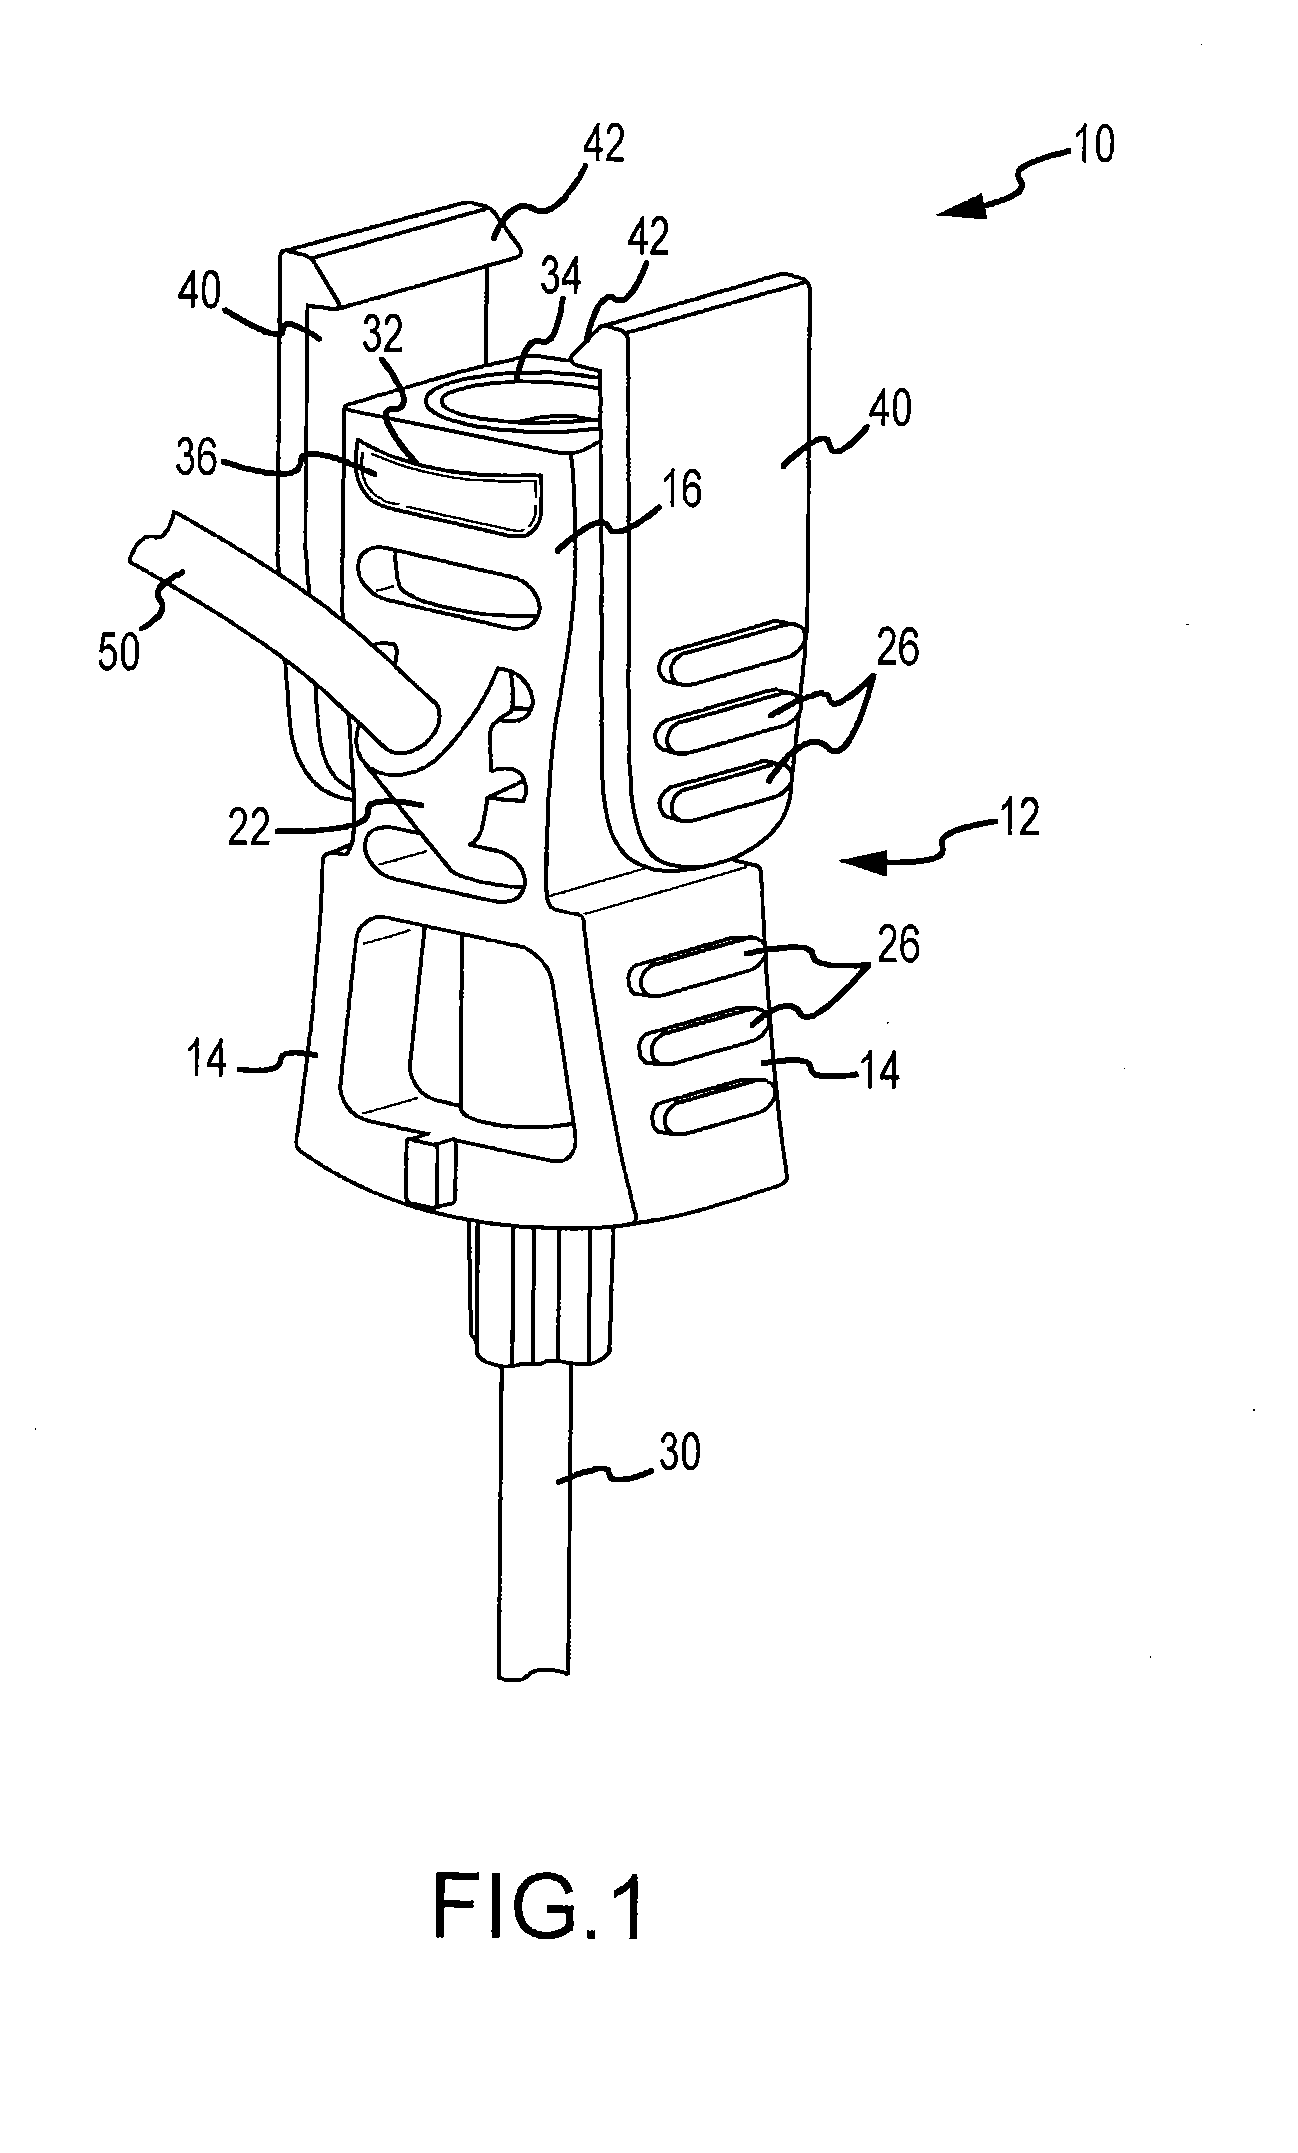 Electrical stimulation and infusion introducer assembly